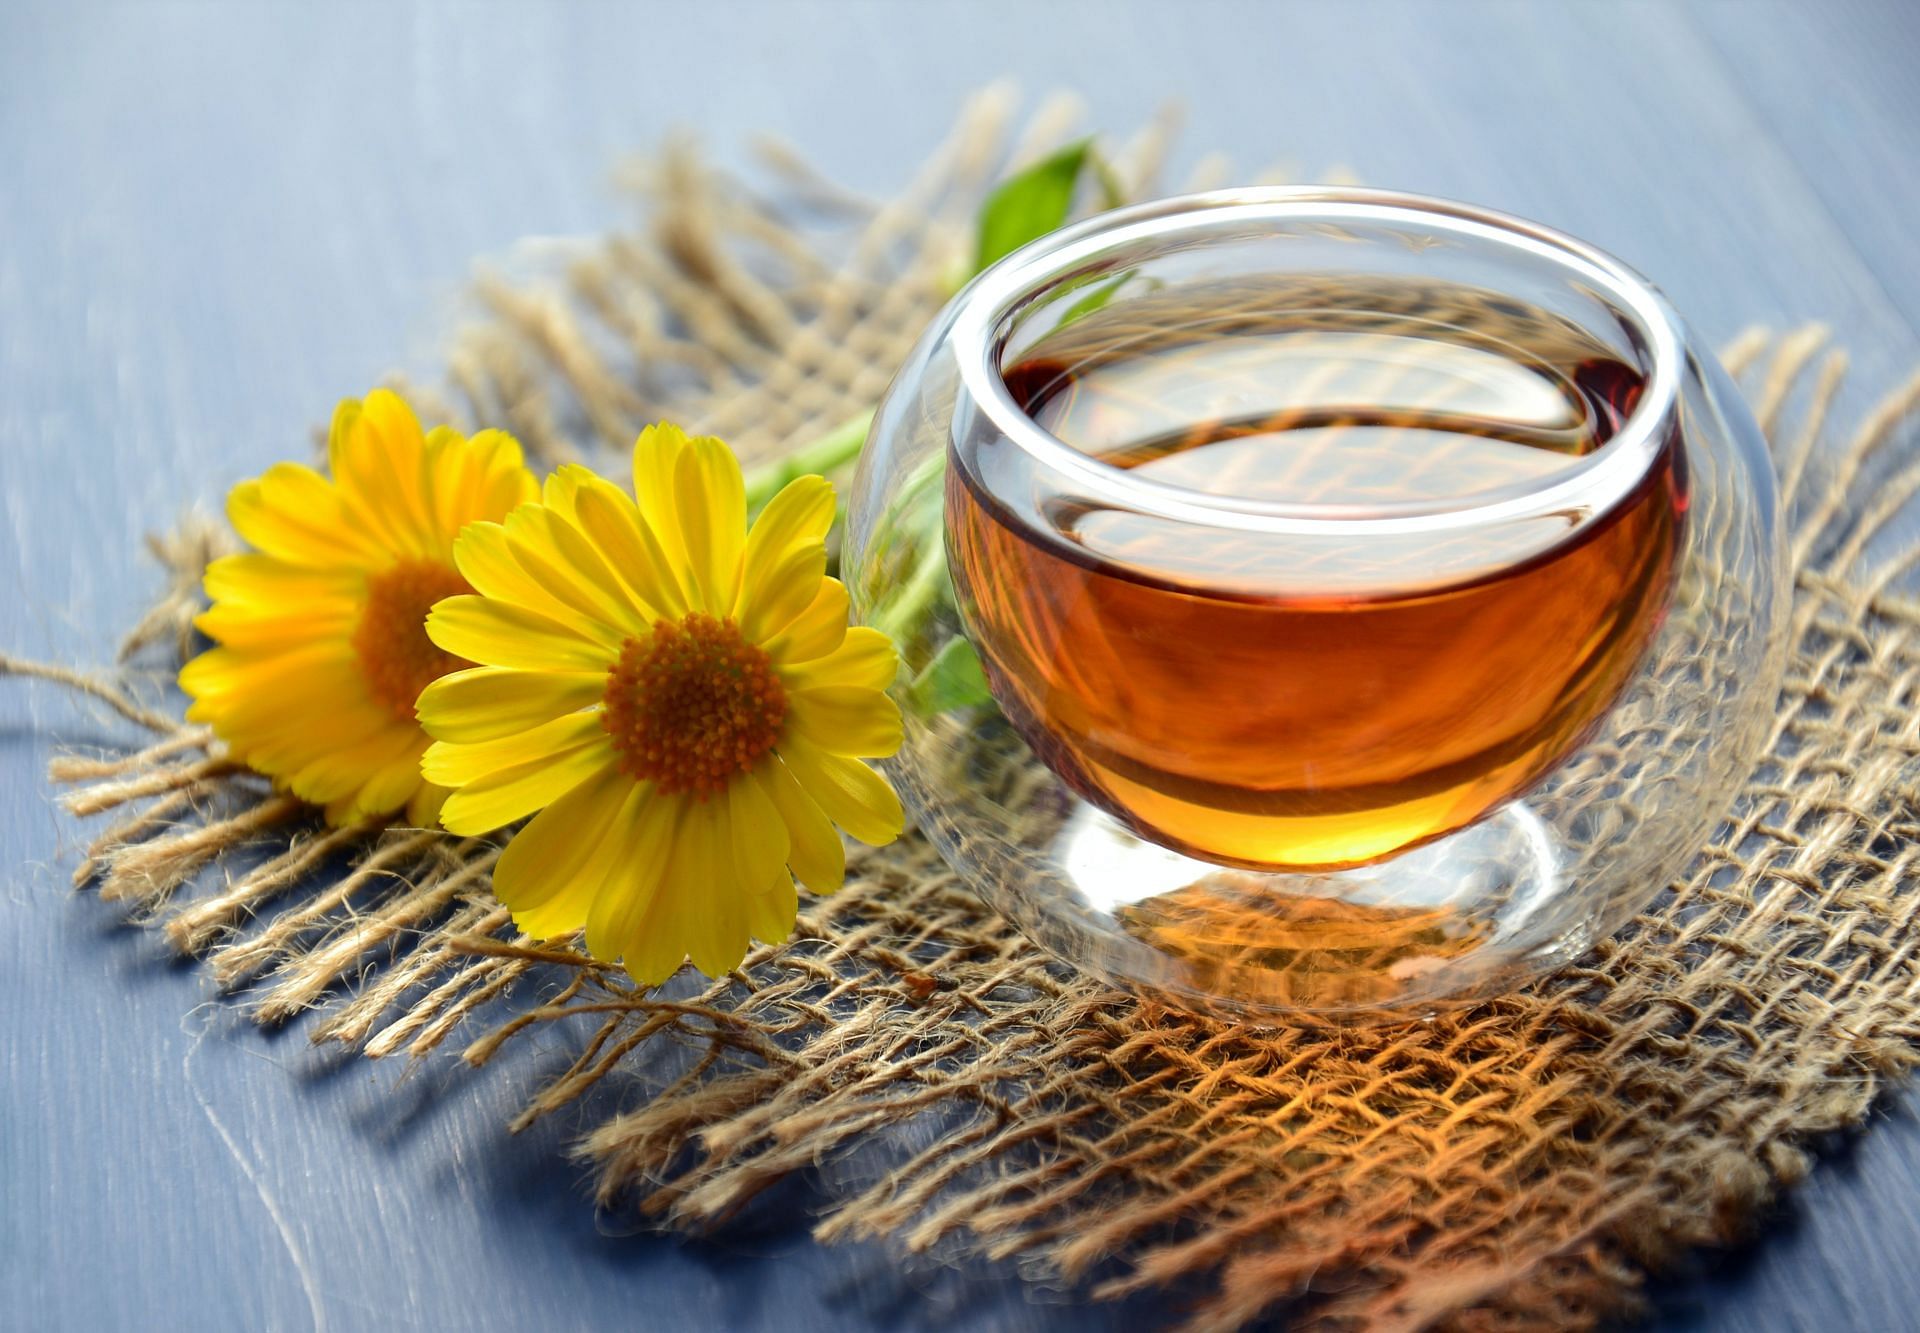 Benefits of drinking tea in evening (image sourced via Pexels / Photo by Mareefe)